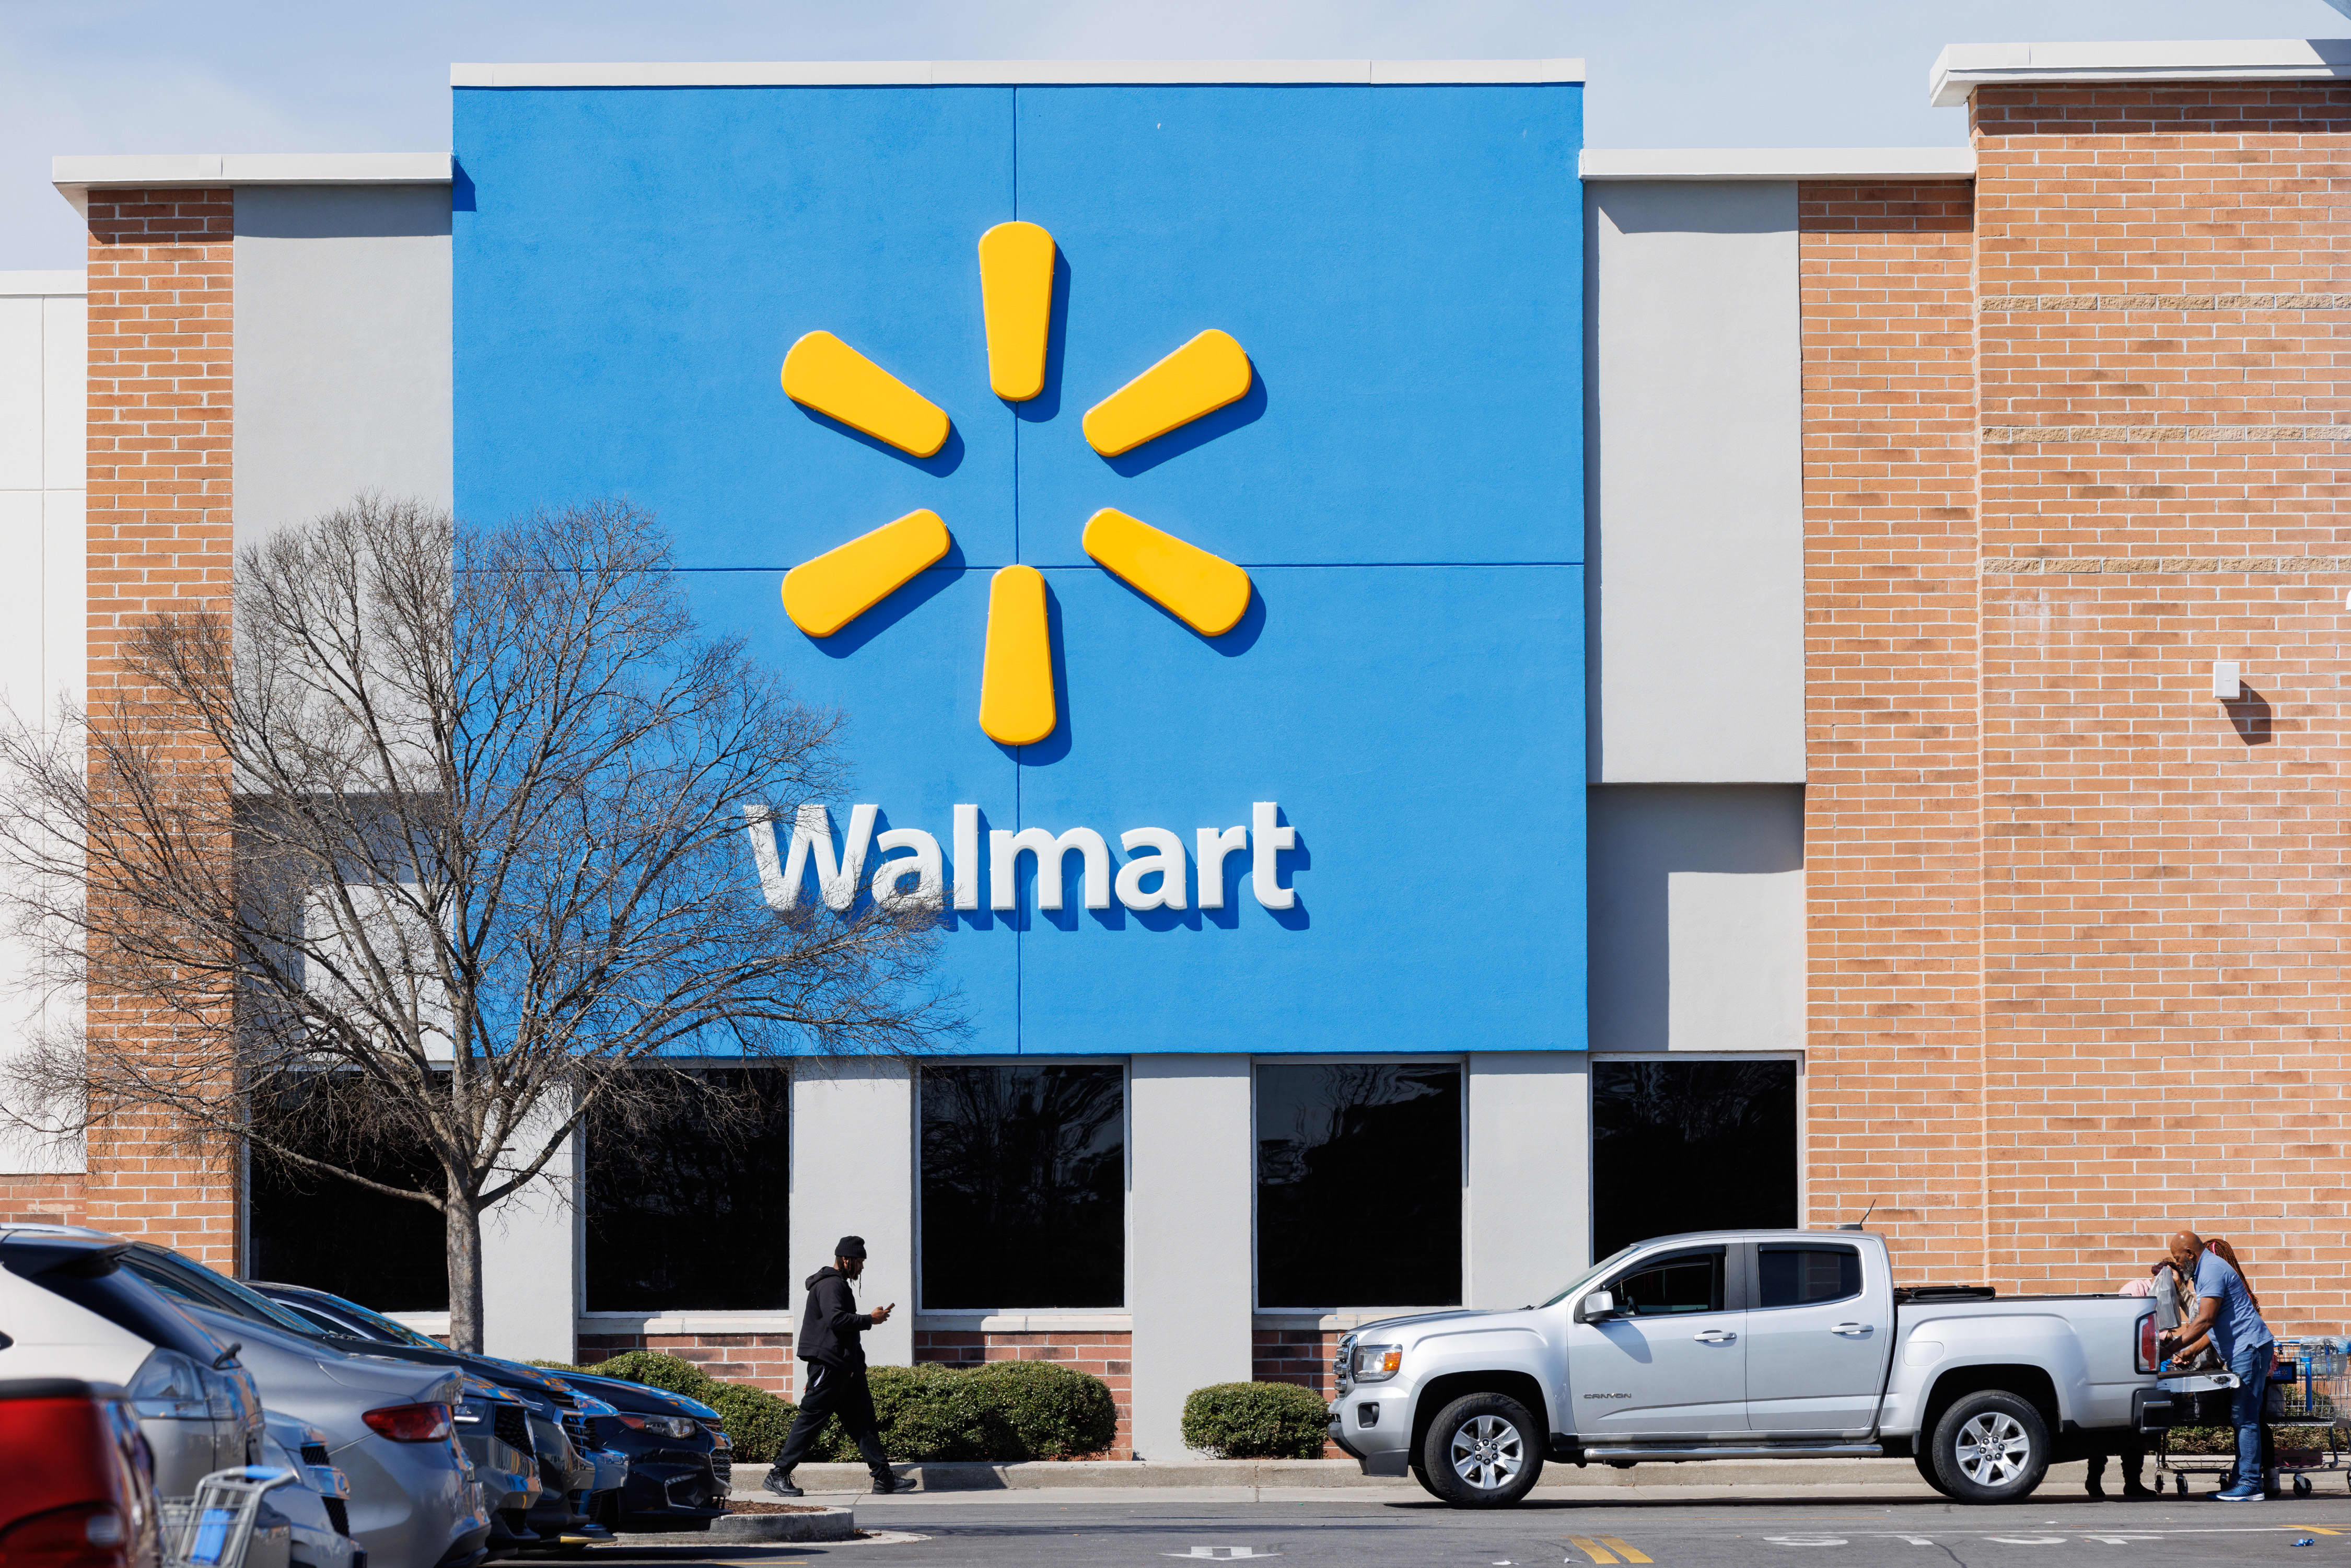 List of assets owned by Walmart - Wikipedia